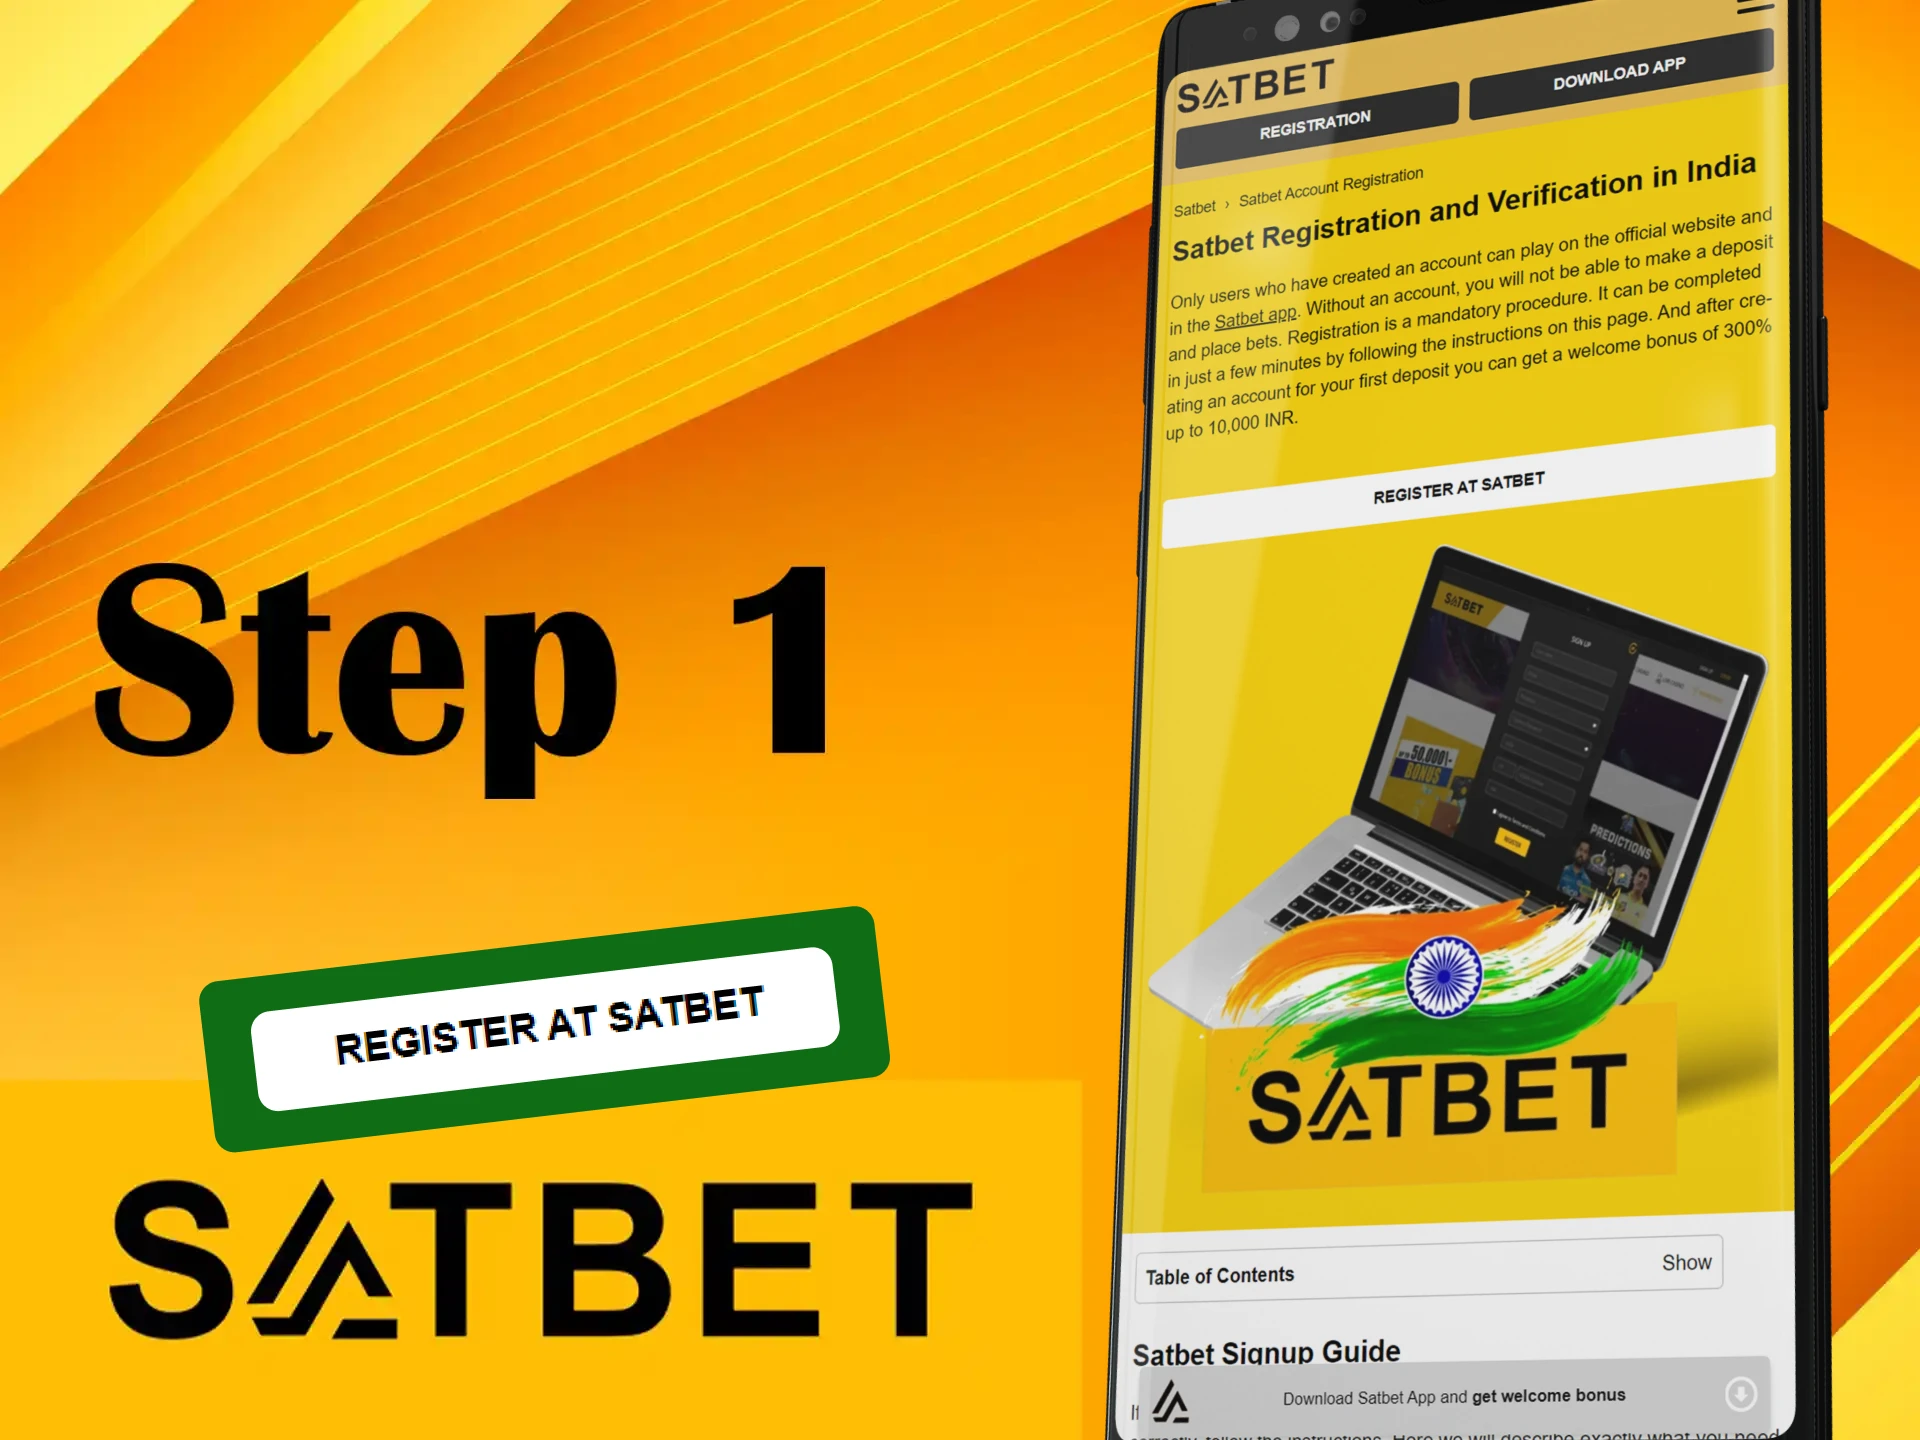 Launch the Satbet app on your phone.